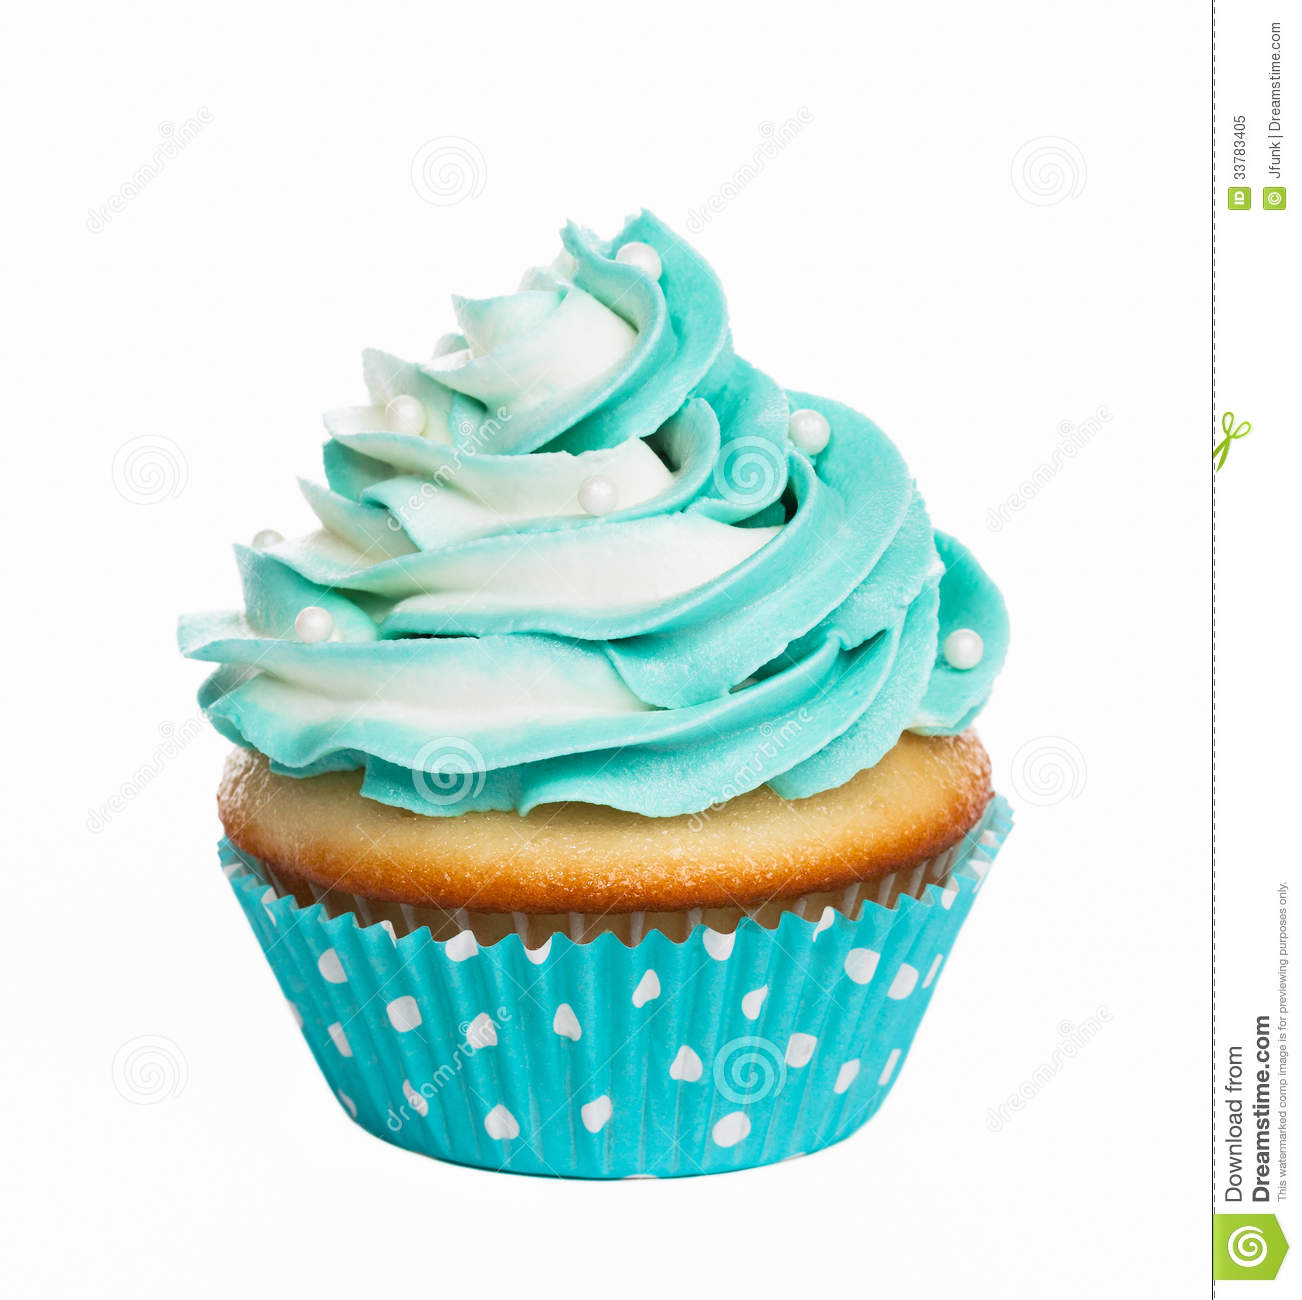 Teal Birthday Cupcake With Butter Cream Icing Isolated On White